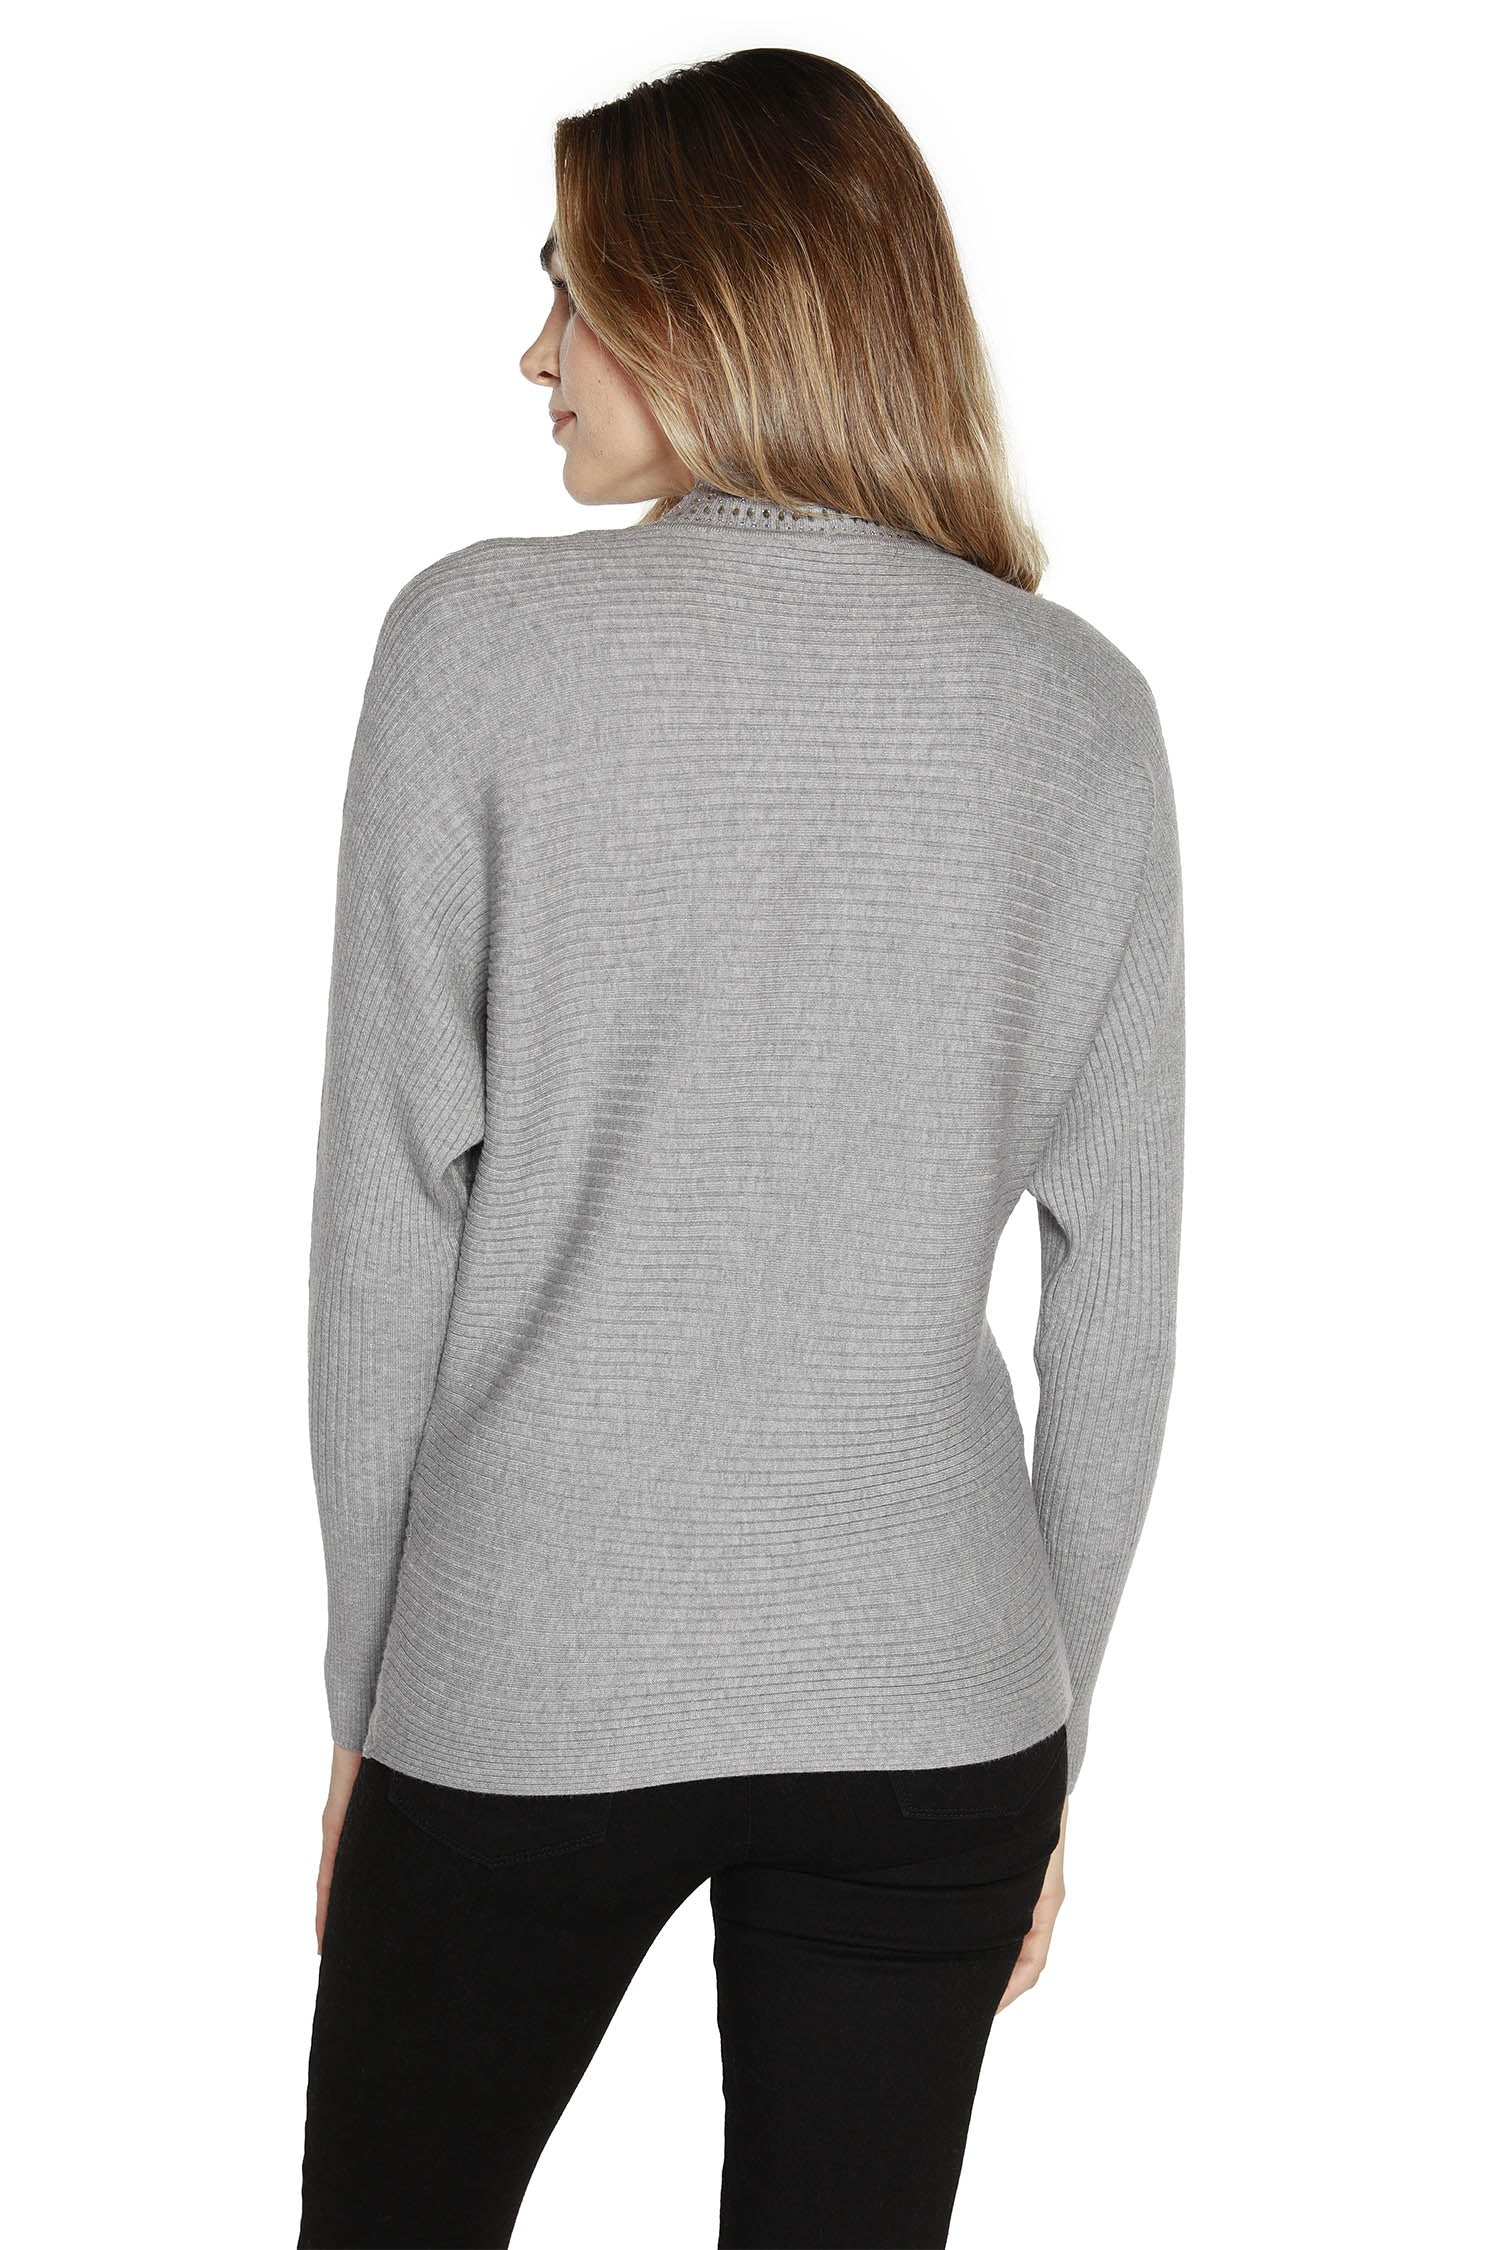 Women's Ribbed Knit Dolman with Mock Neck and Rhinestone Detailing